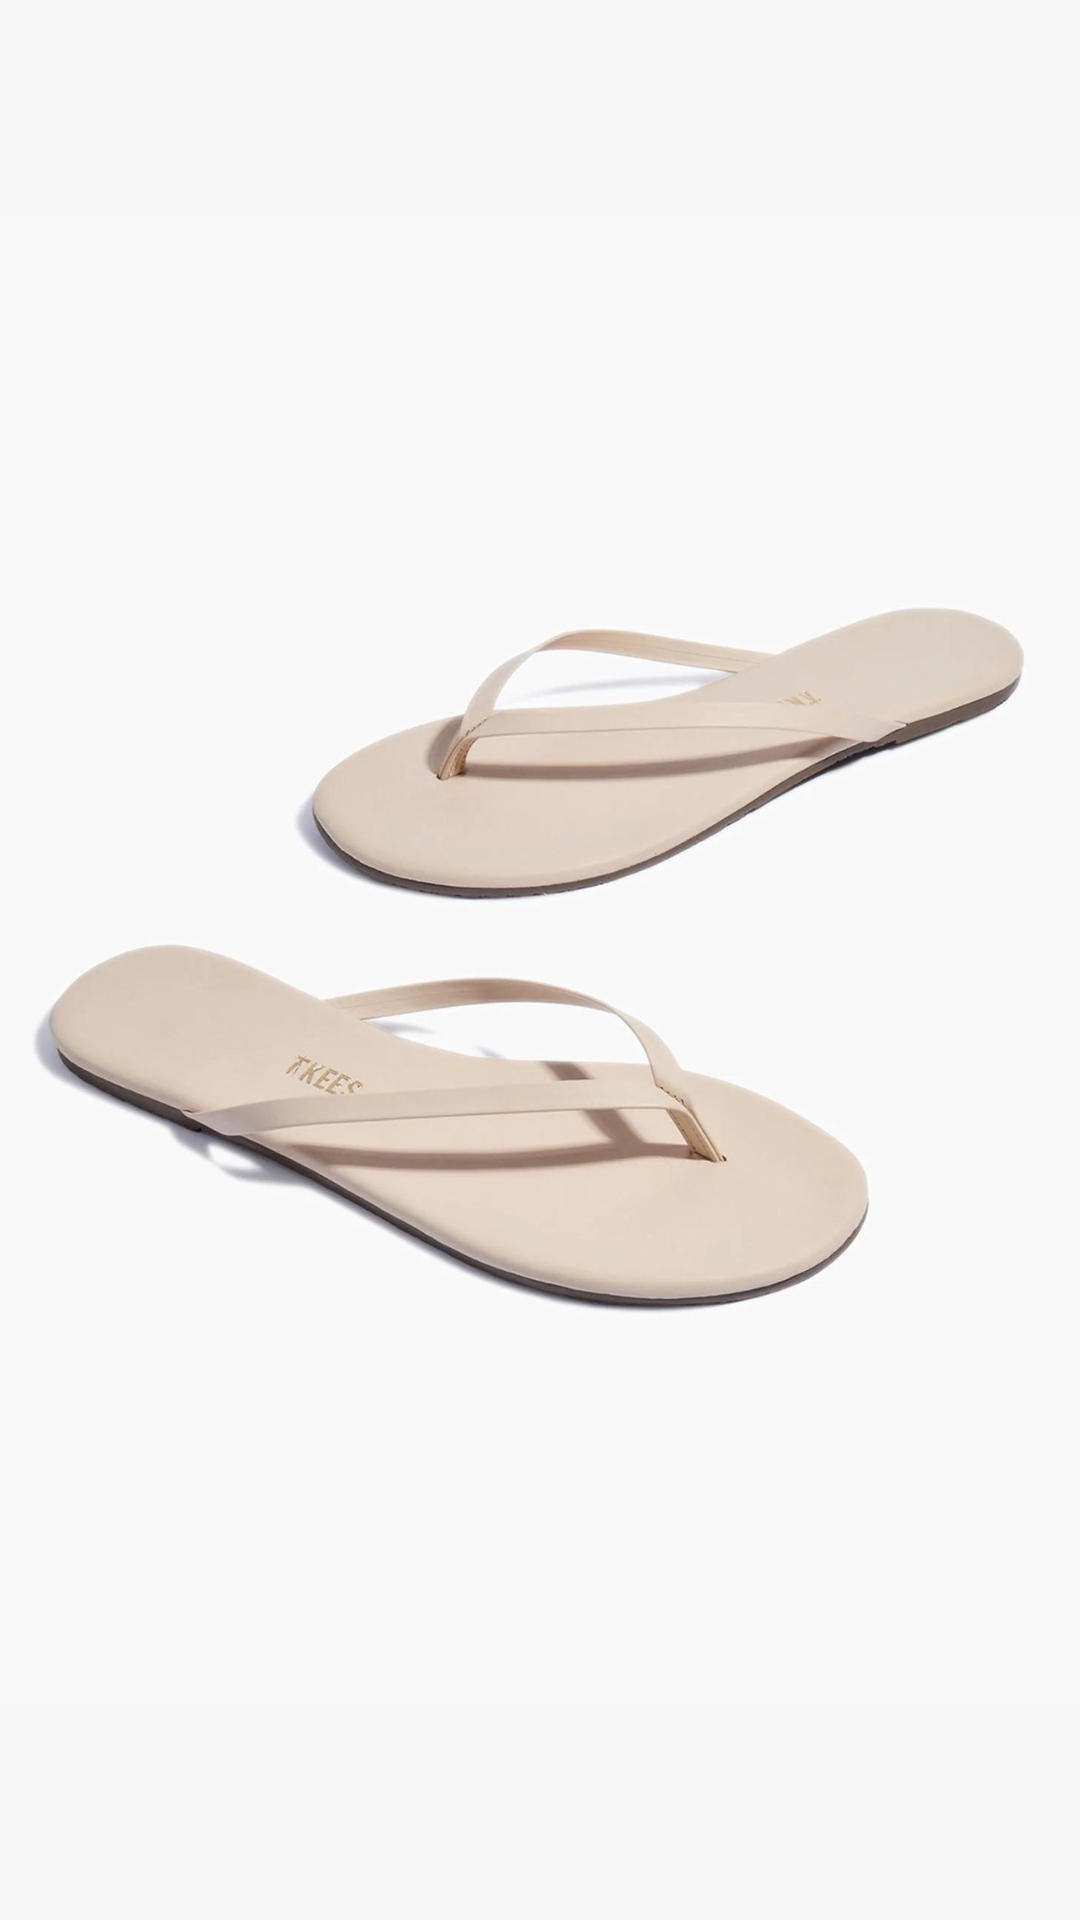 Tkees Lily Liner Sandal in Linen